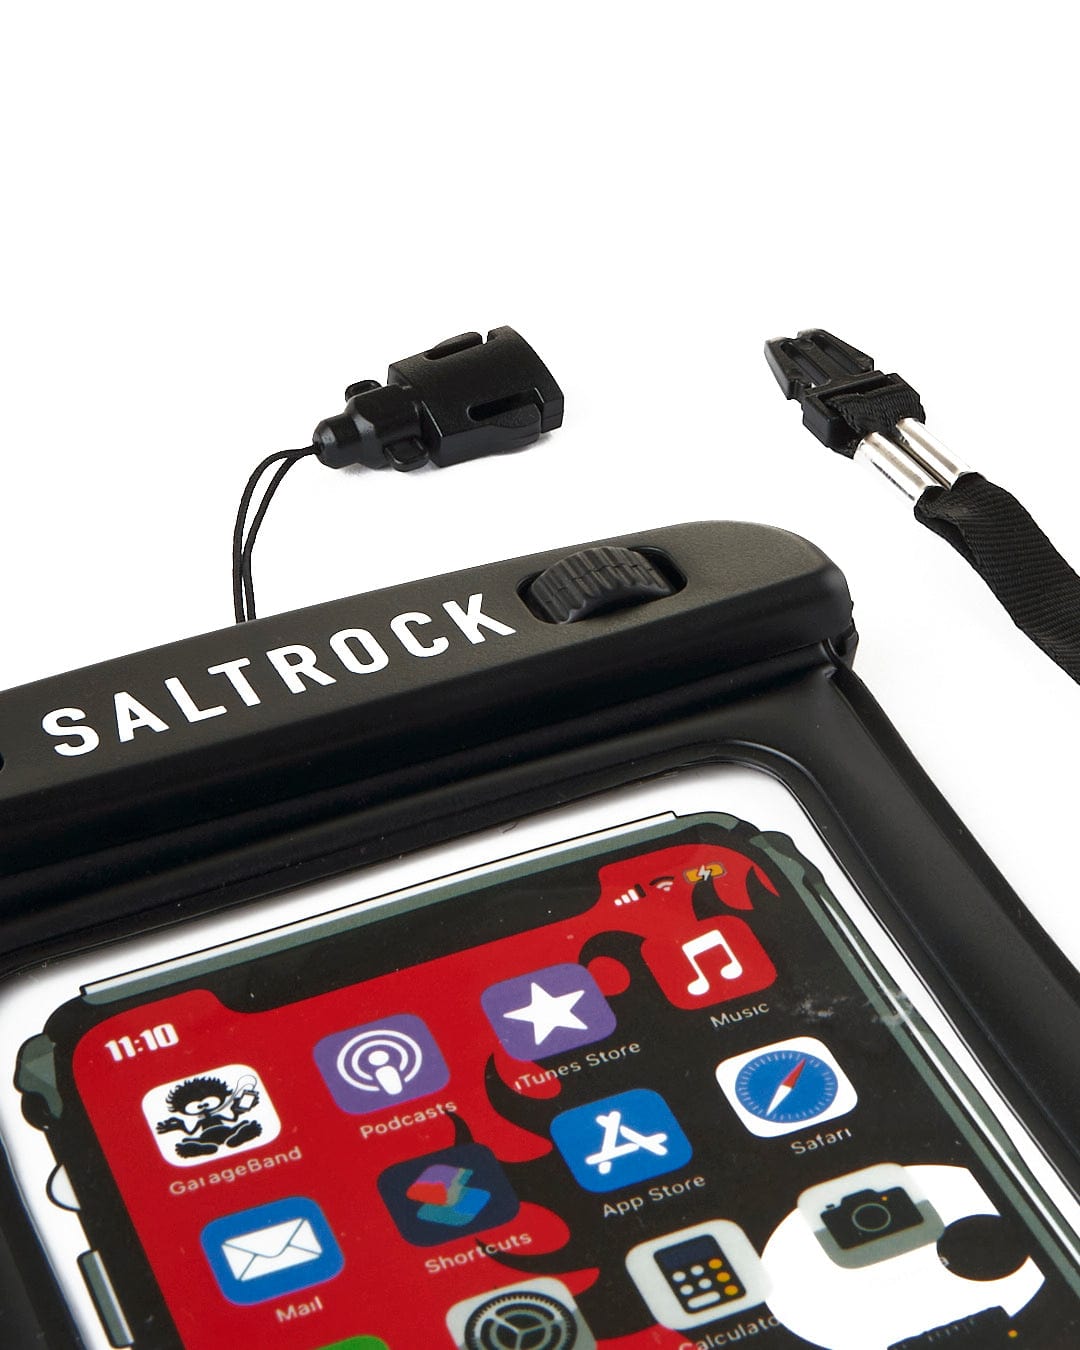 The Saltrock Aqua waterproof phone pouch in Black for iPhone XS/XS Max/XR features touch screen capabilities and is also waterproof, ensuring your phone stays safe even if it accidentally floats in water.